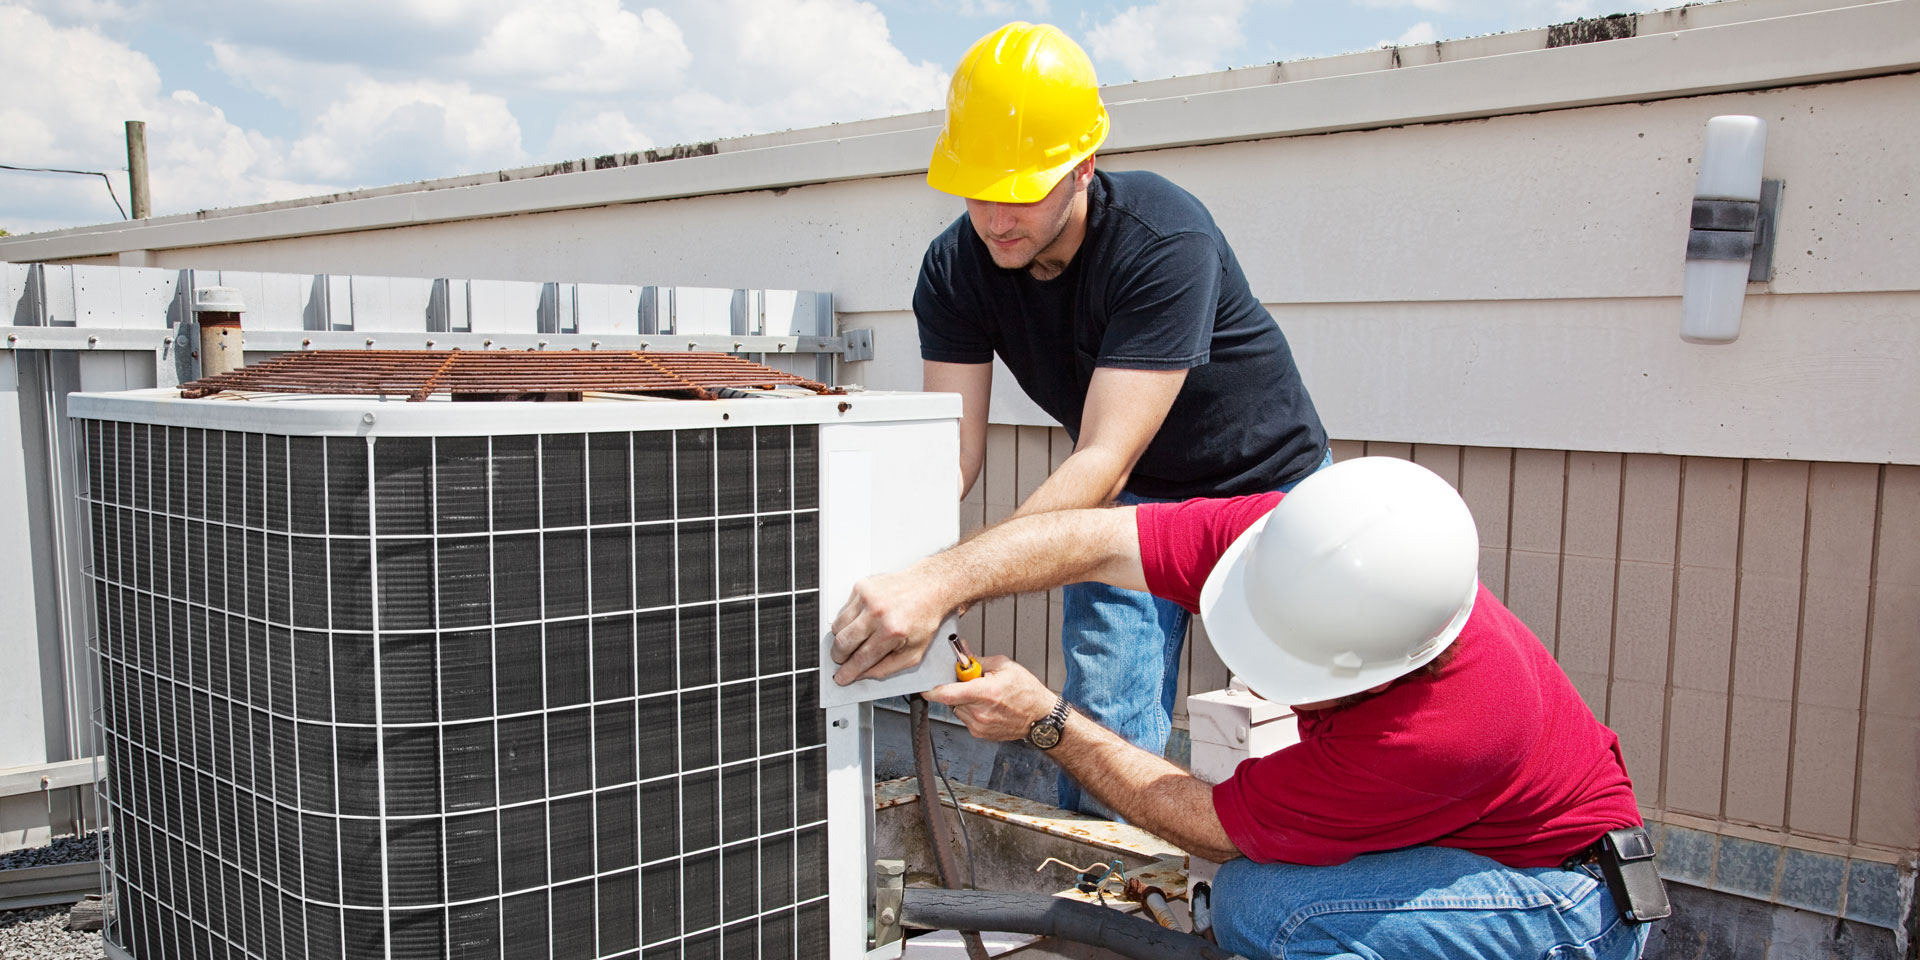 How much does an HVAC tune-up cost in 2020?